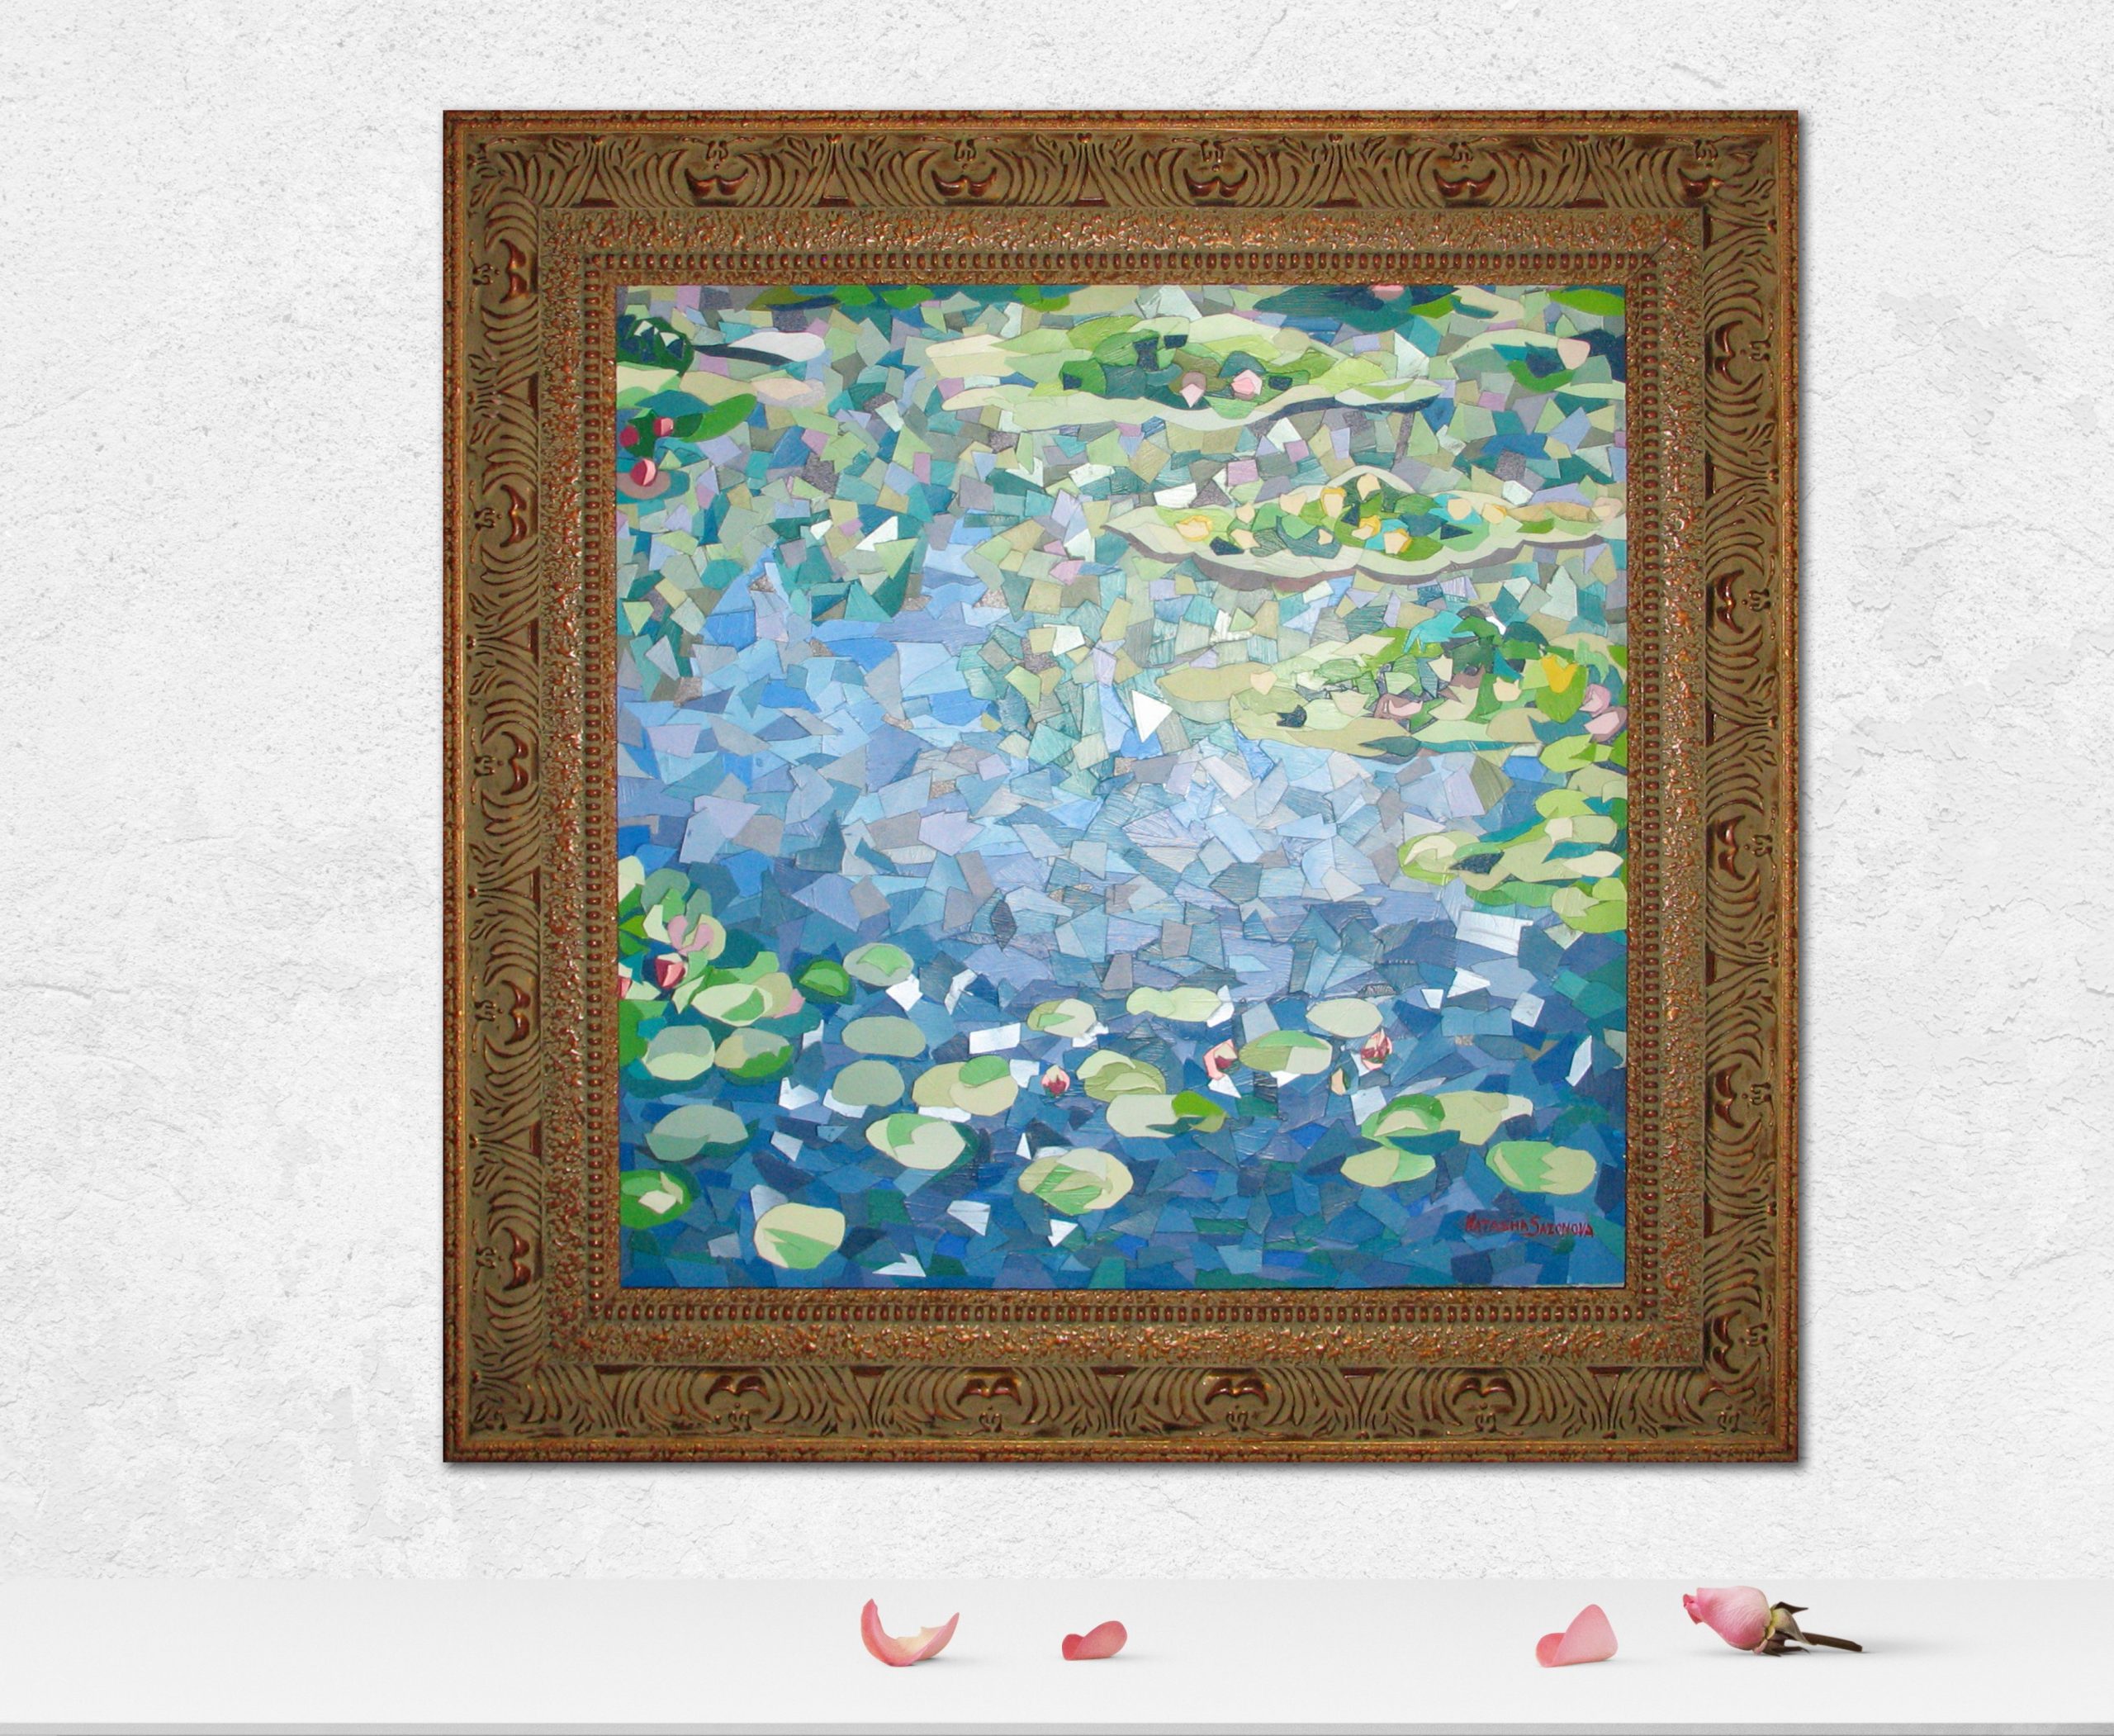 Collage from recycled materials inspired by Monet's lily pond